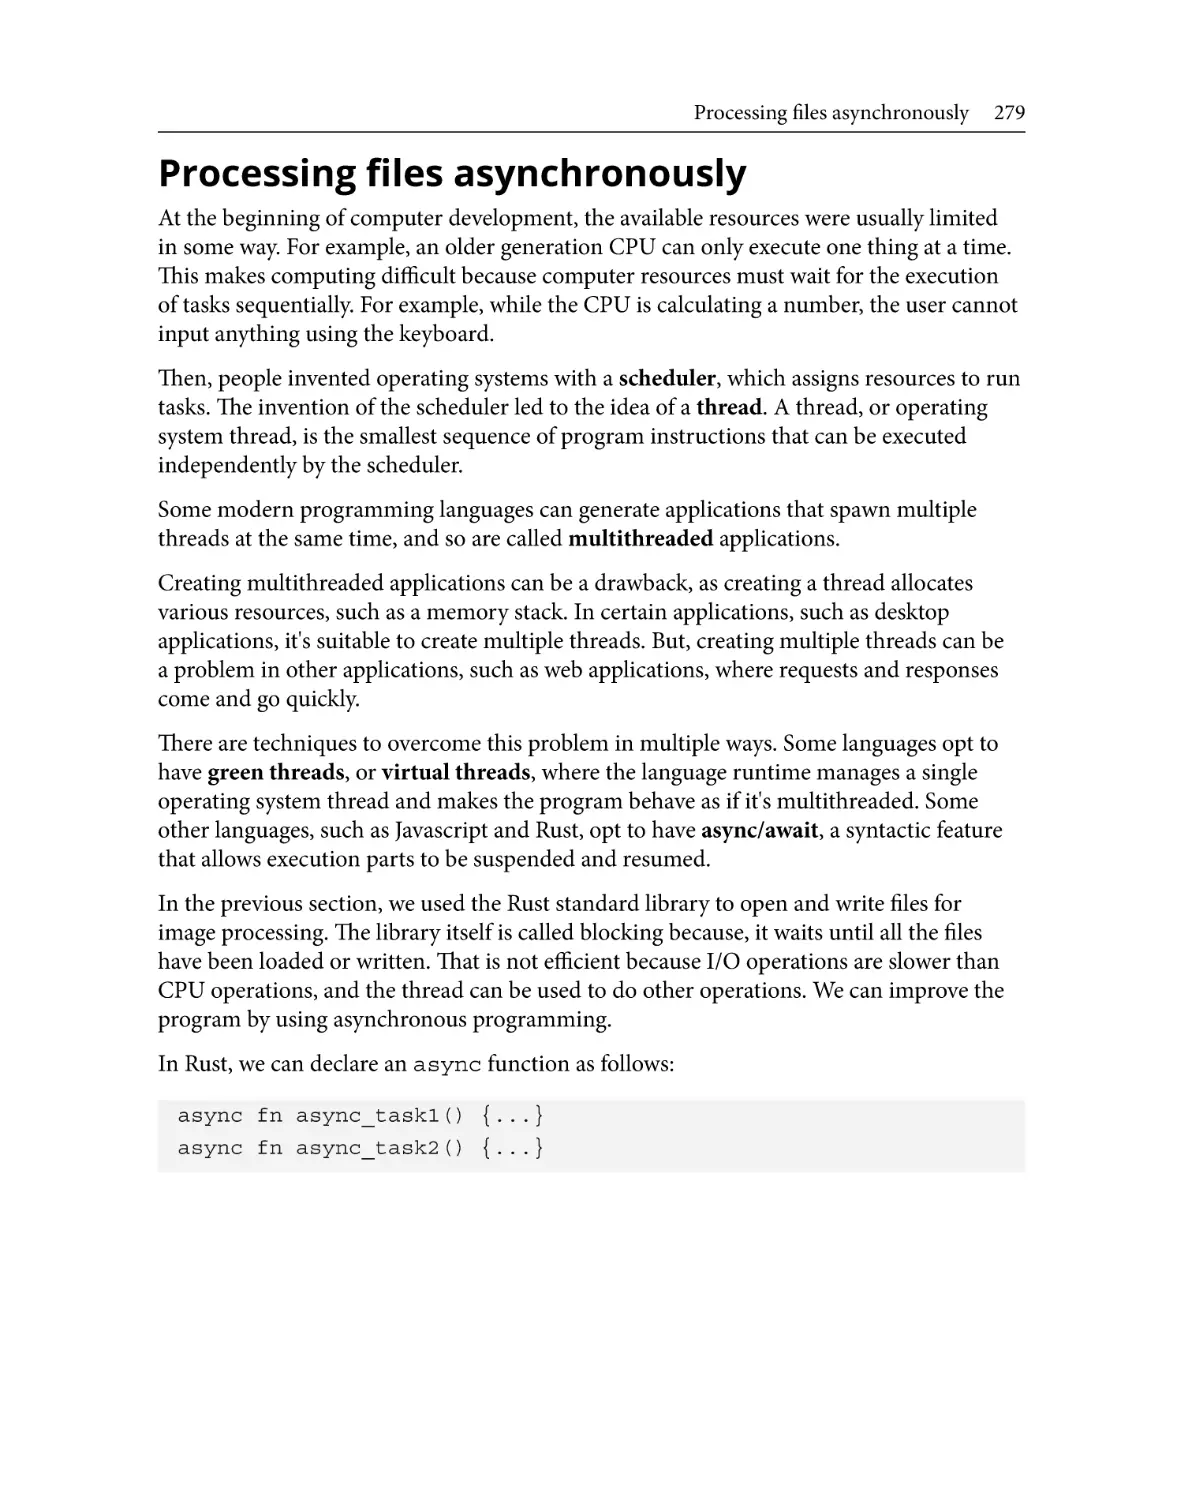 Processing files asynchronously